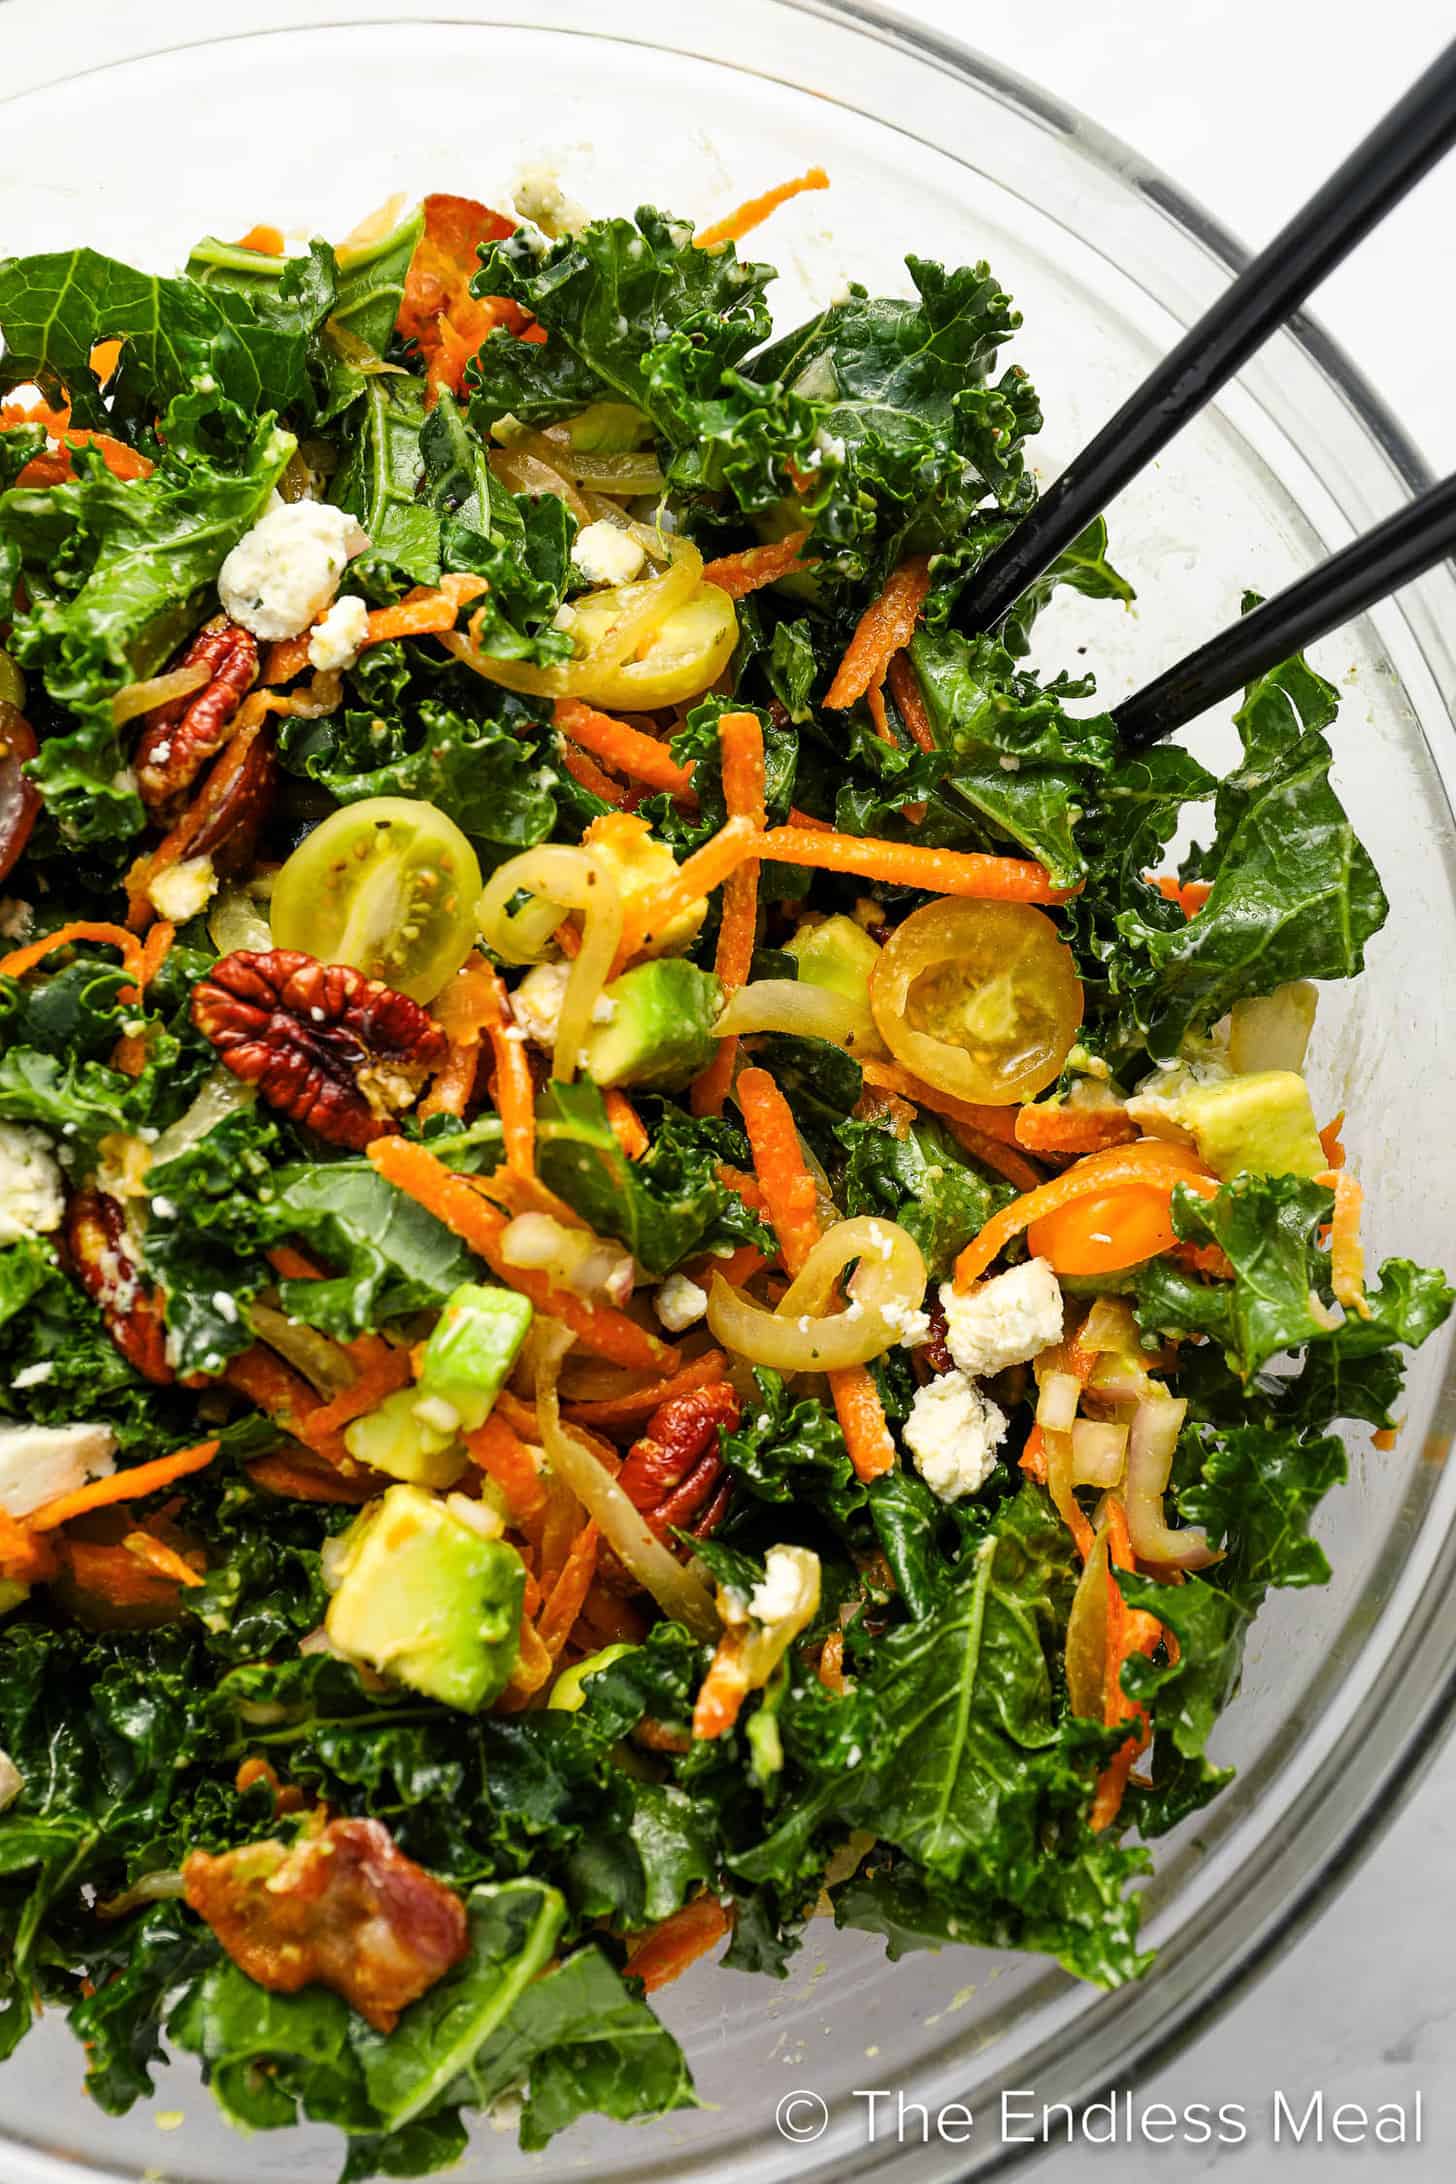 Kale Salad being tossed in a bowl.